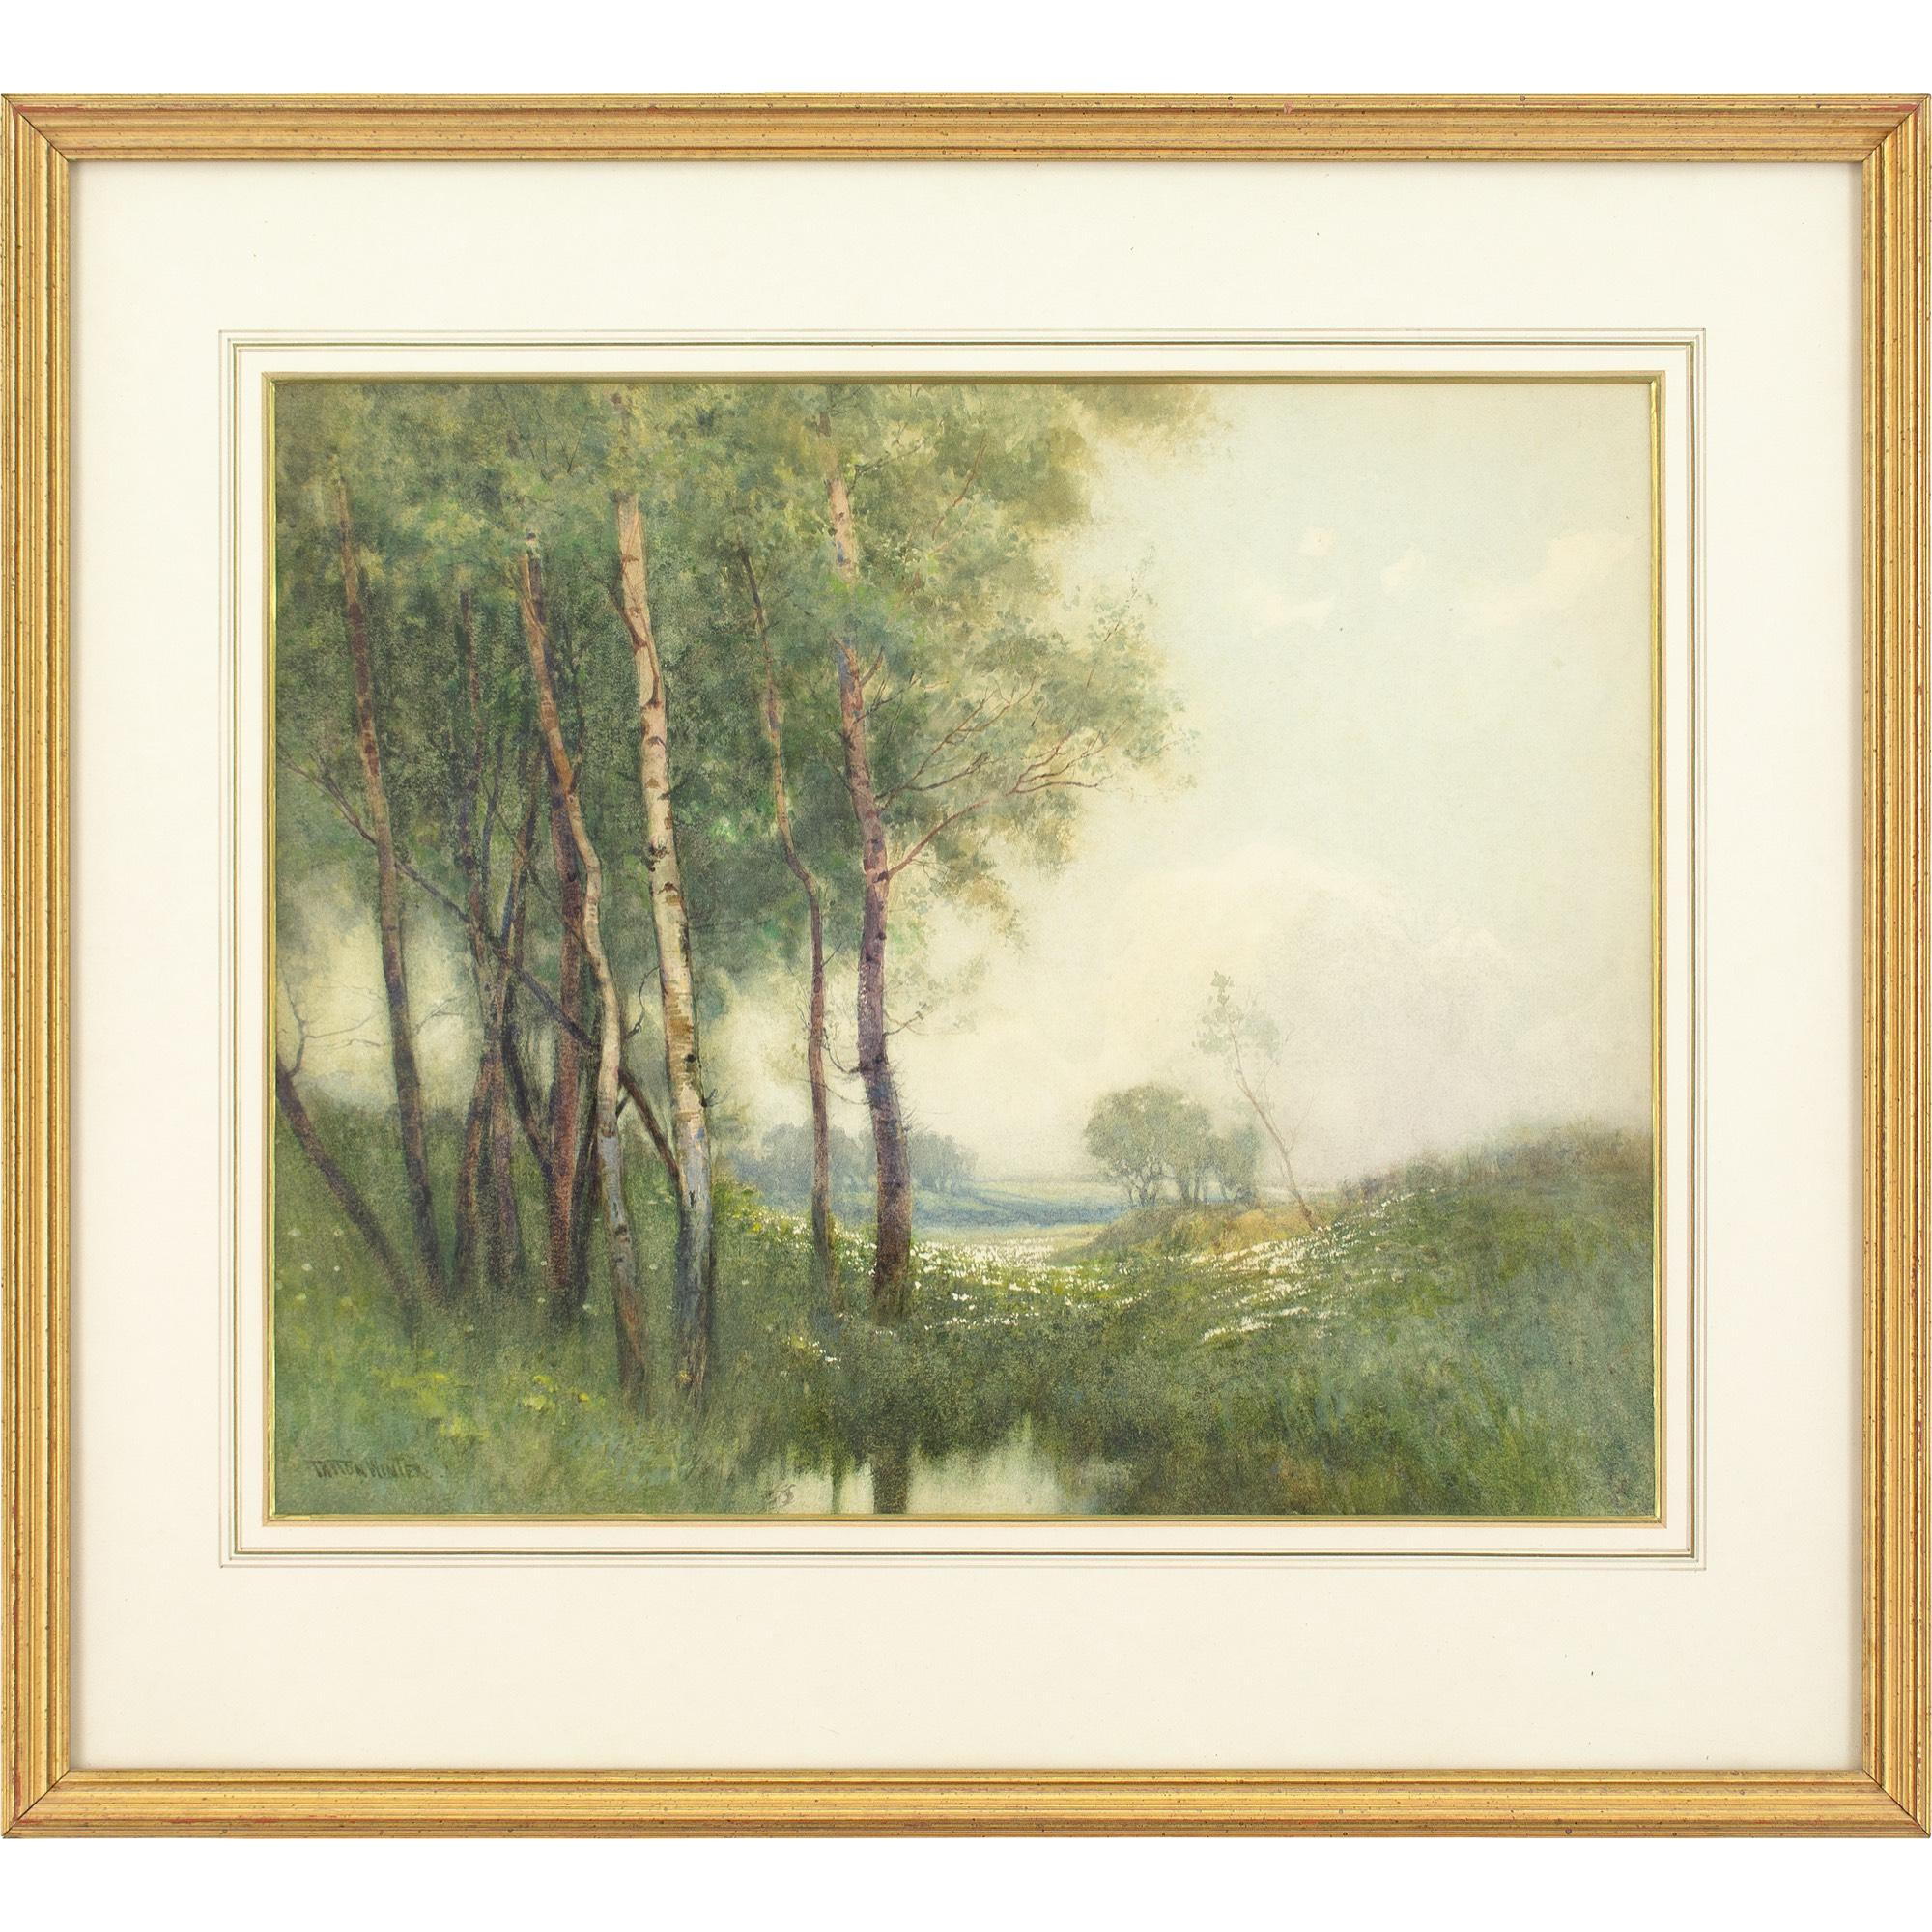 This early 20th-century watercolour by British artist William Tatton Winter (1855-1928) depicts a Summertime view with birch trees.

Spindly verticals crowd the left of this composition. The familiar forms of silver birch trees vie for attention.